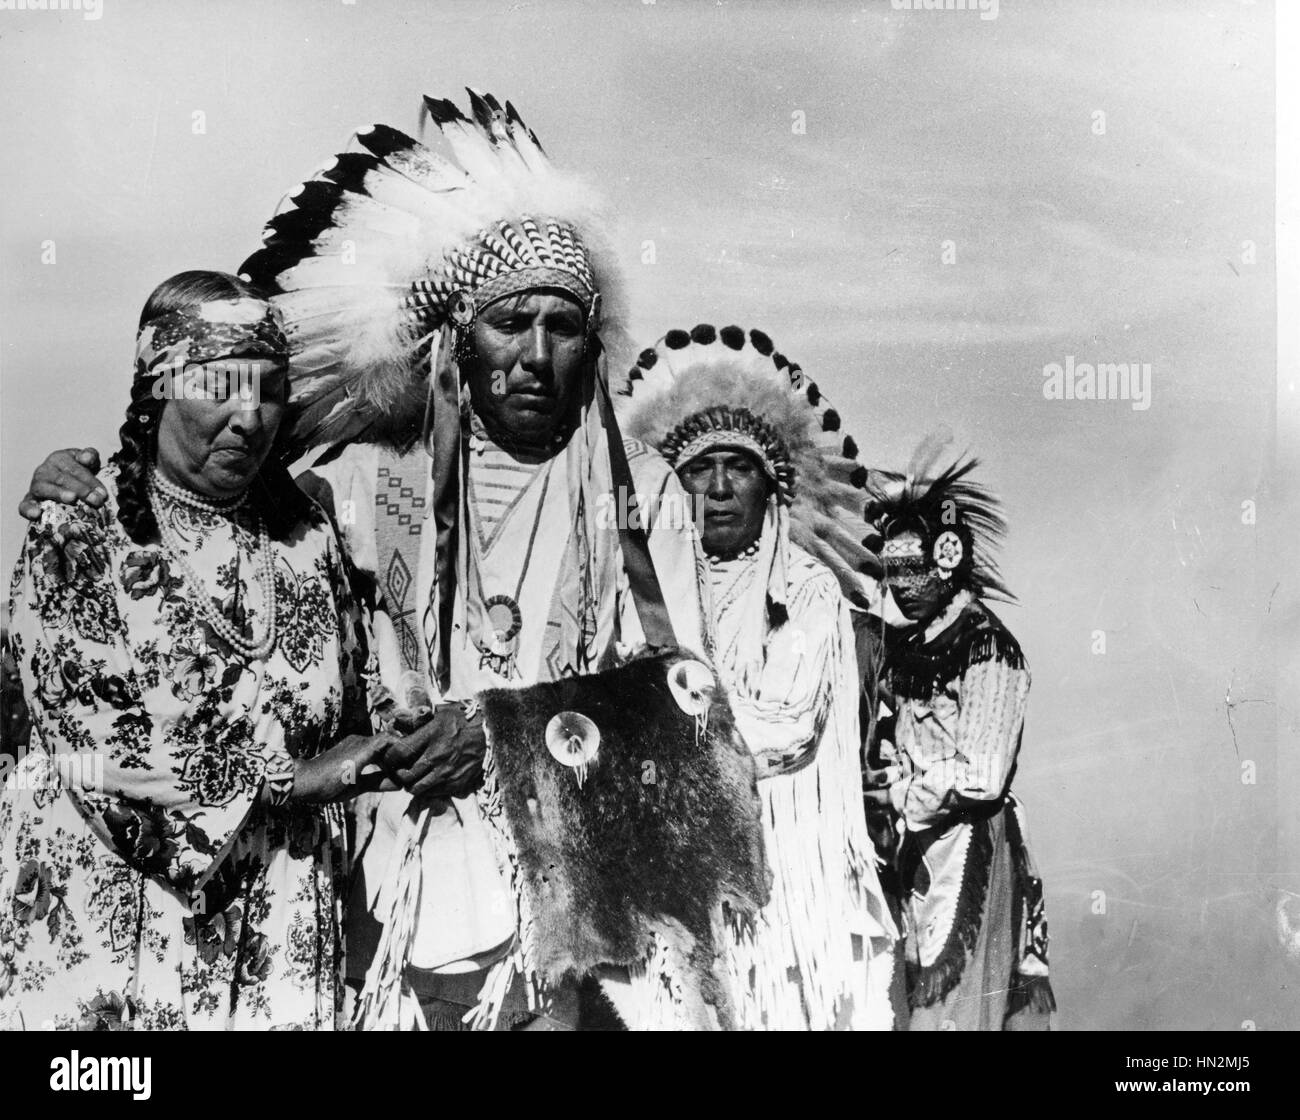 The Canadian indians: A band from Carlston Alberta playing the Sun Dance Photograph by Gar Lanney 20th century Canada National film board of Canada Stock Photo